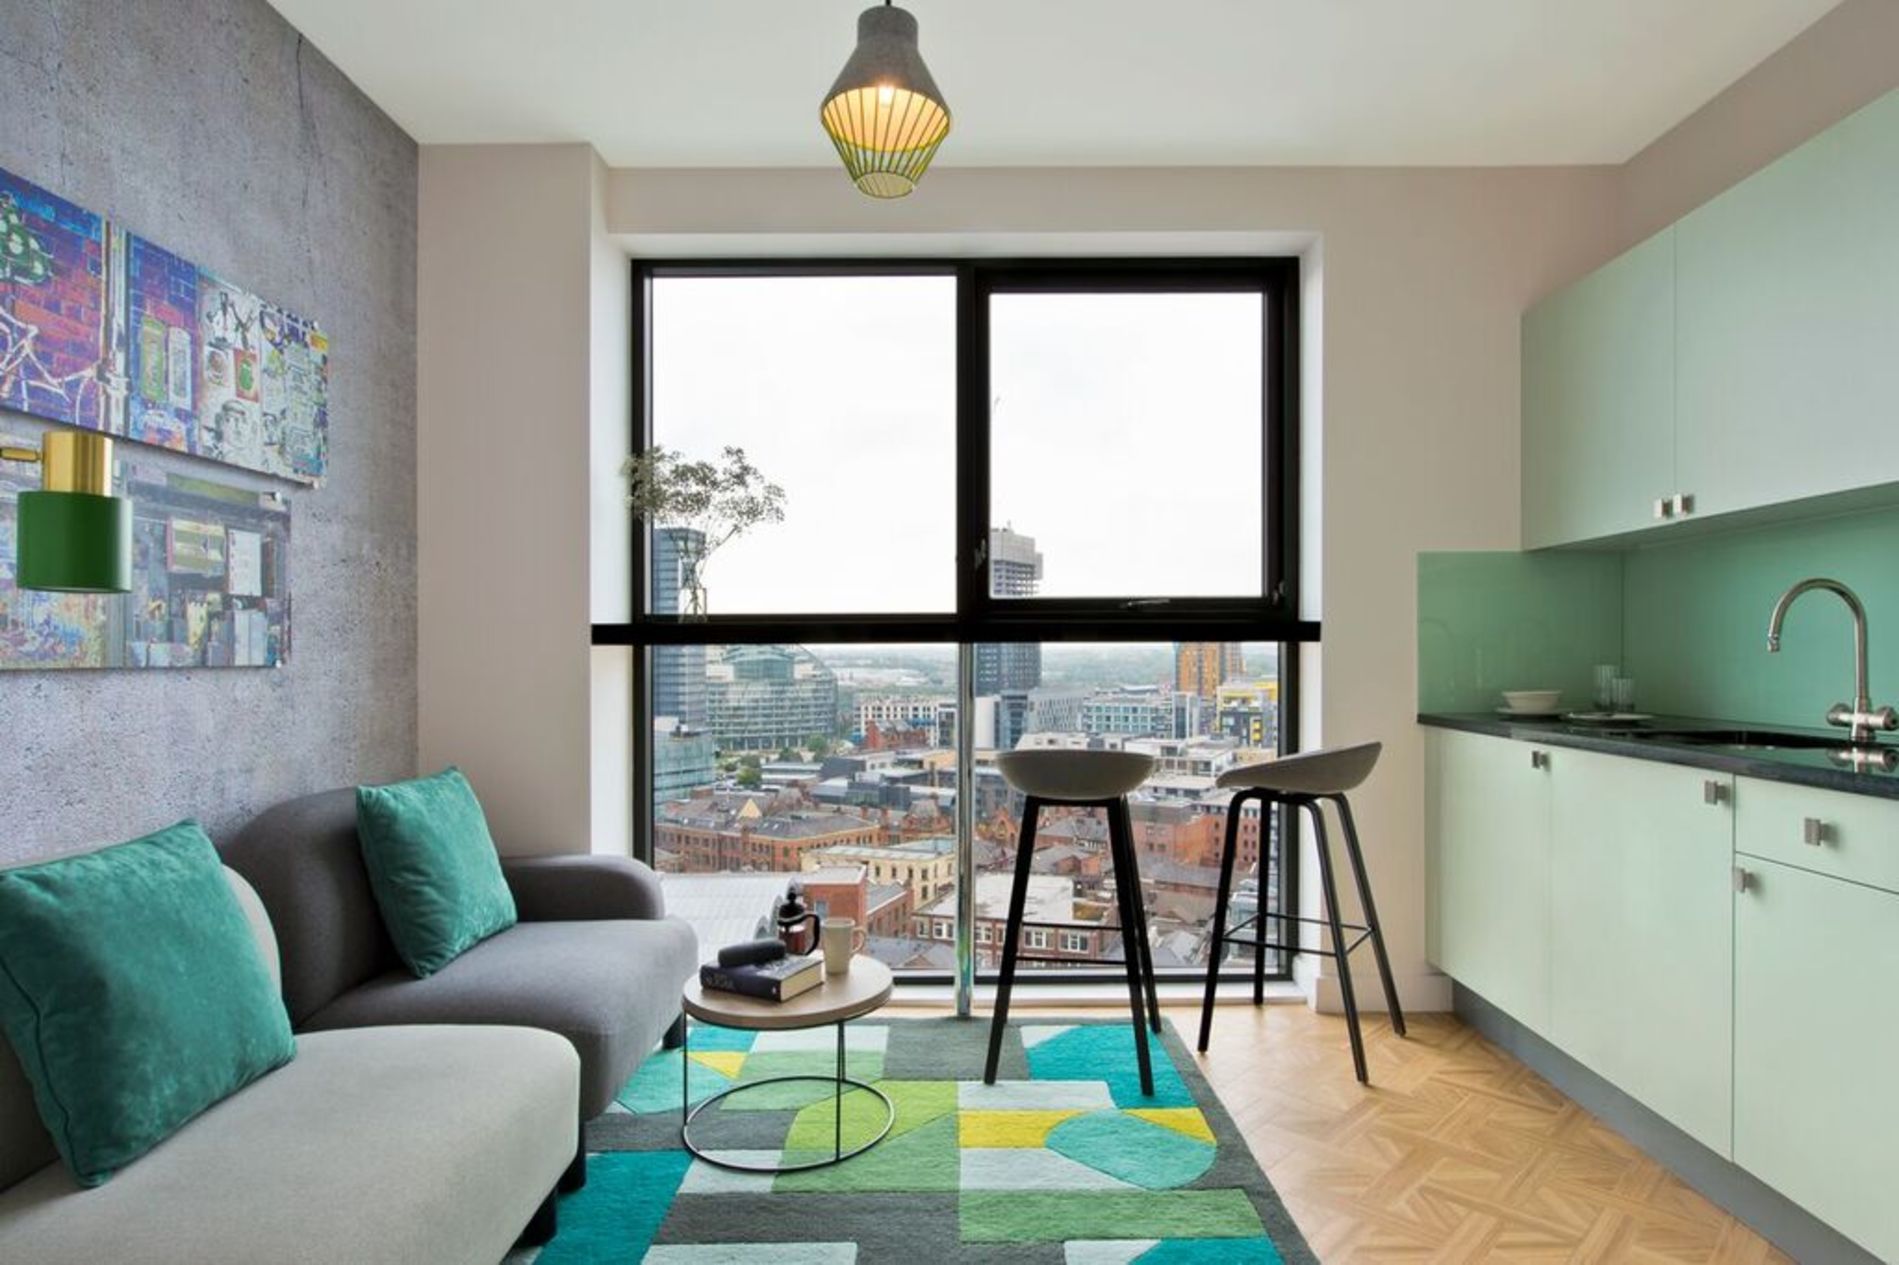 Serviced apartment with a fitness center in the building in Manchester's Northern Quarter